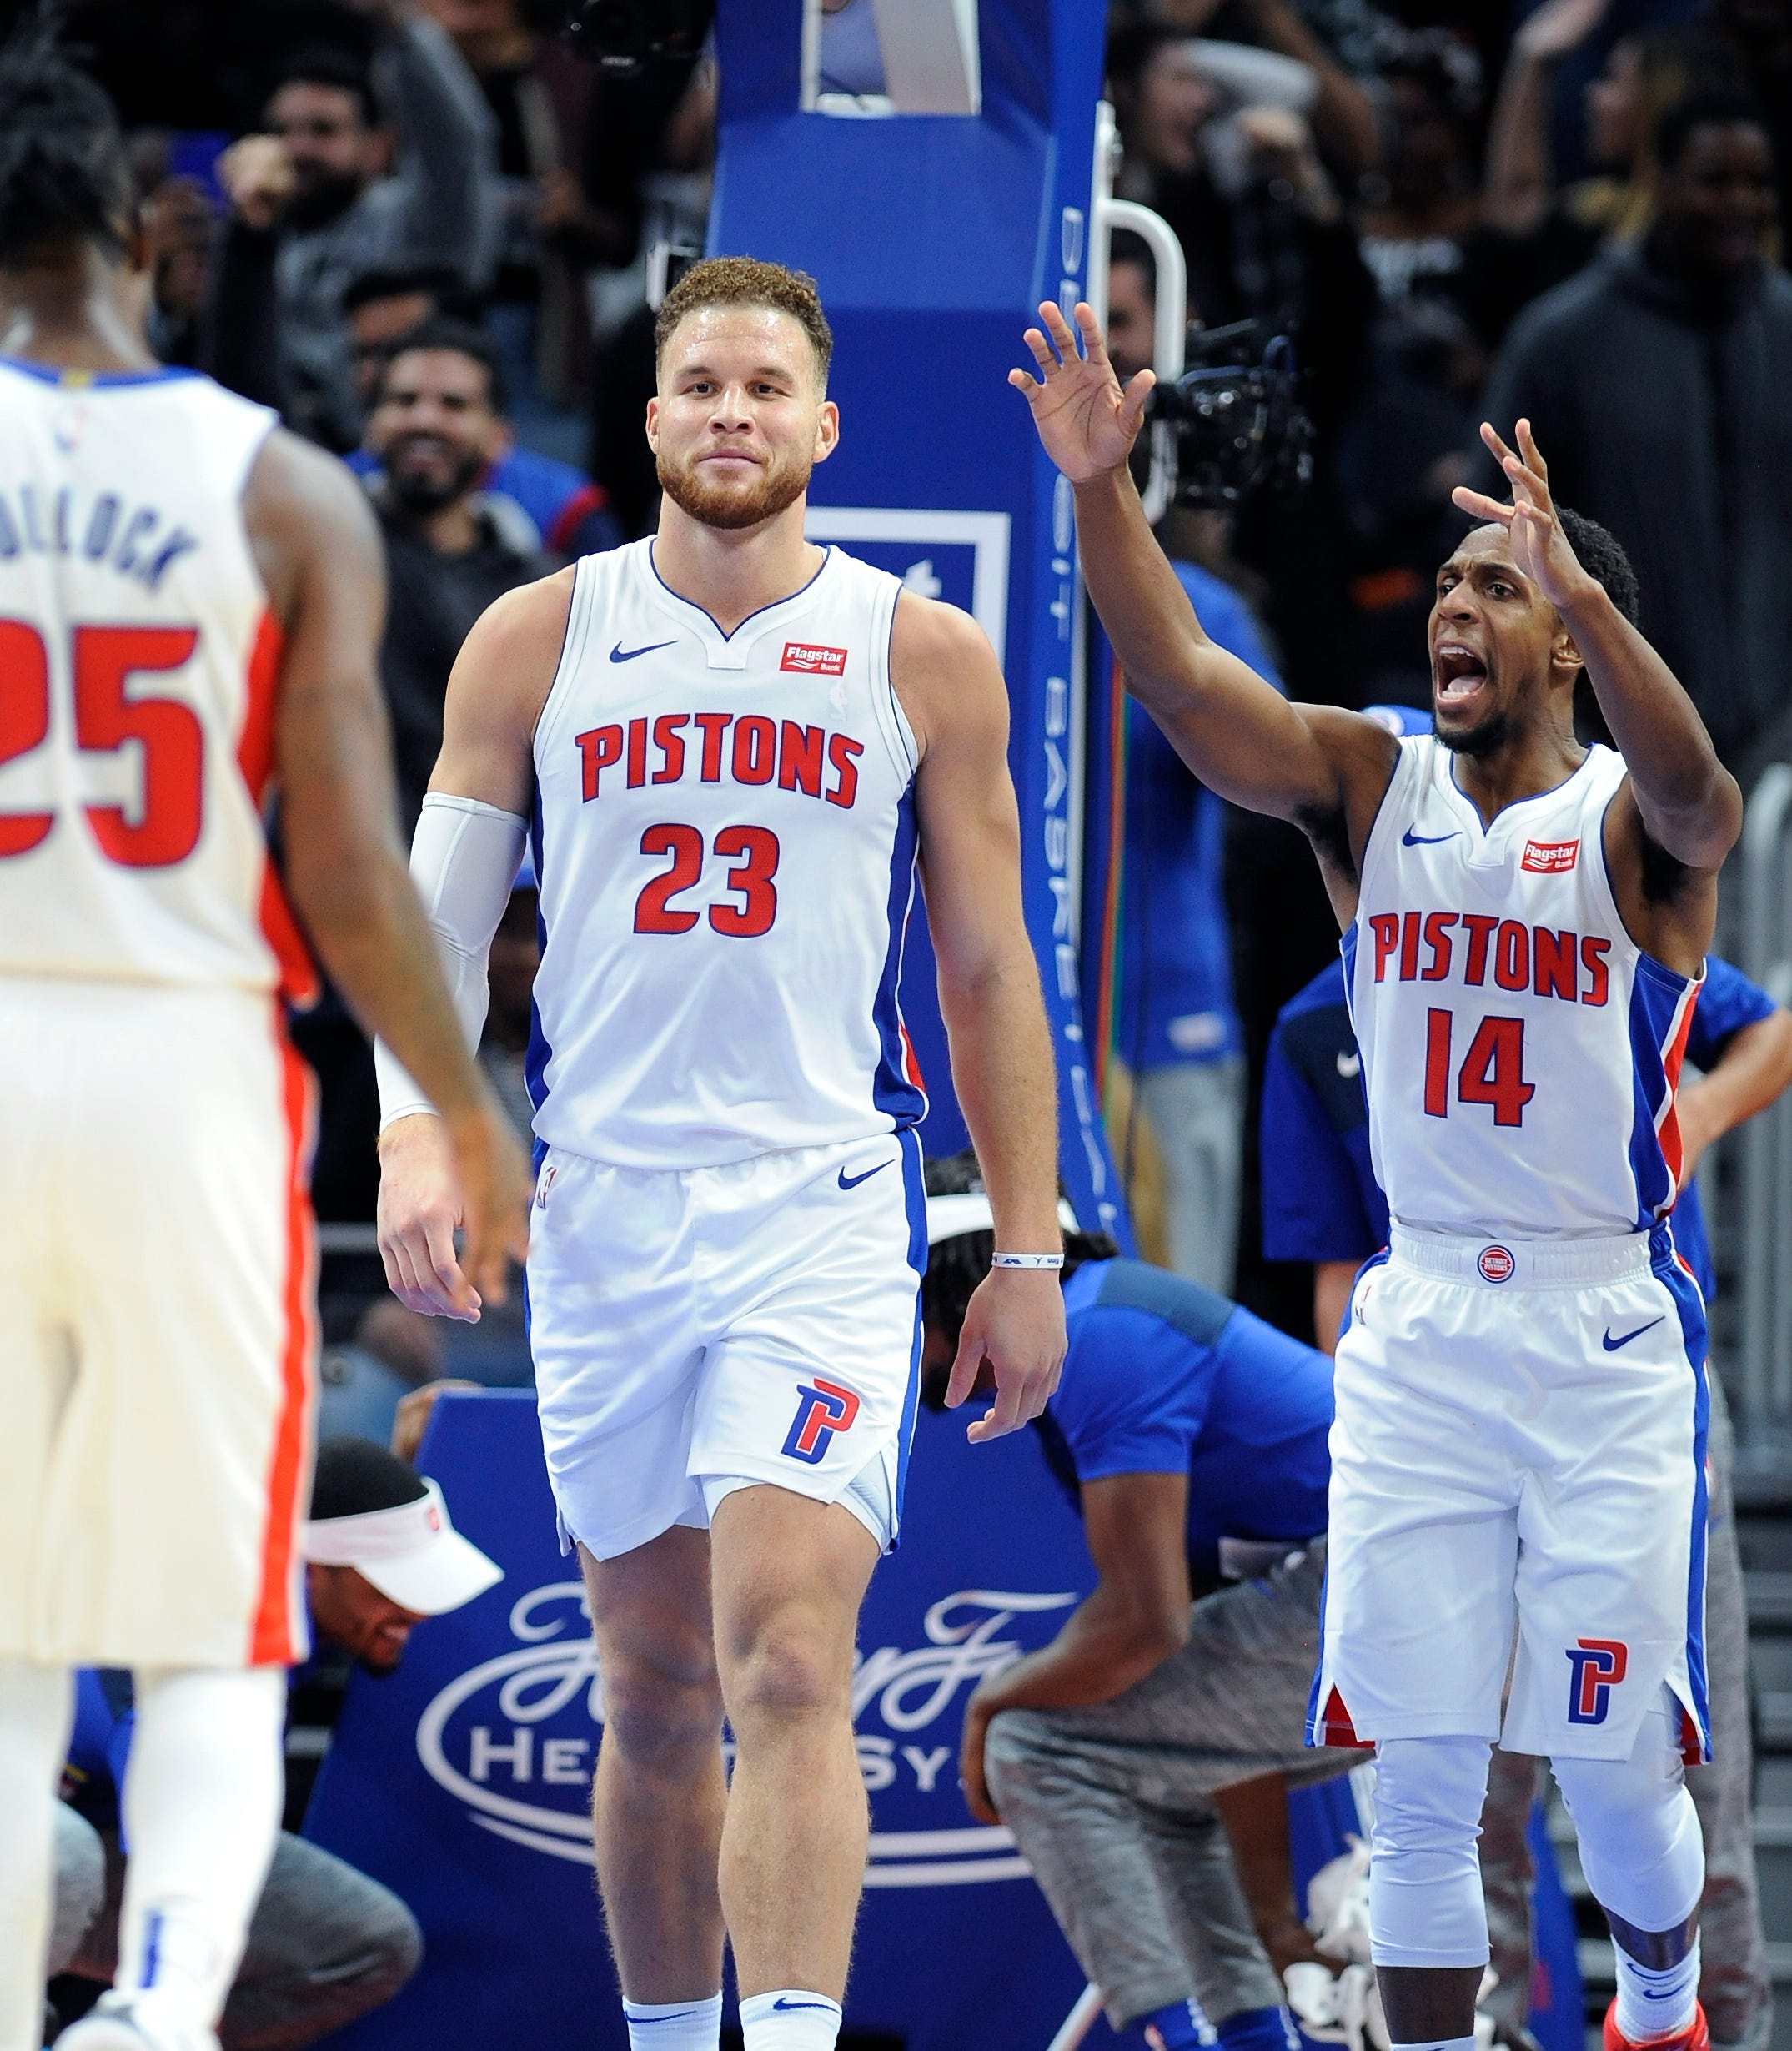 Blake Griffin is all smiles after he completed a three-point play to give the Pistons a 1 point lead with 1.8 second left.